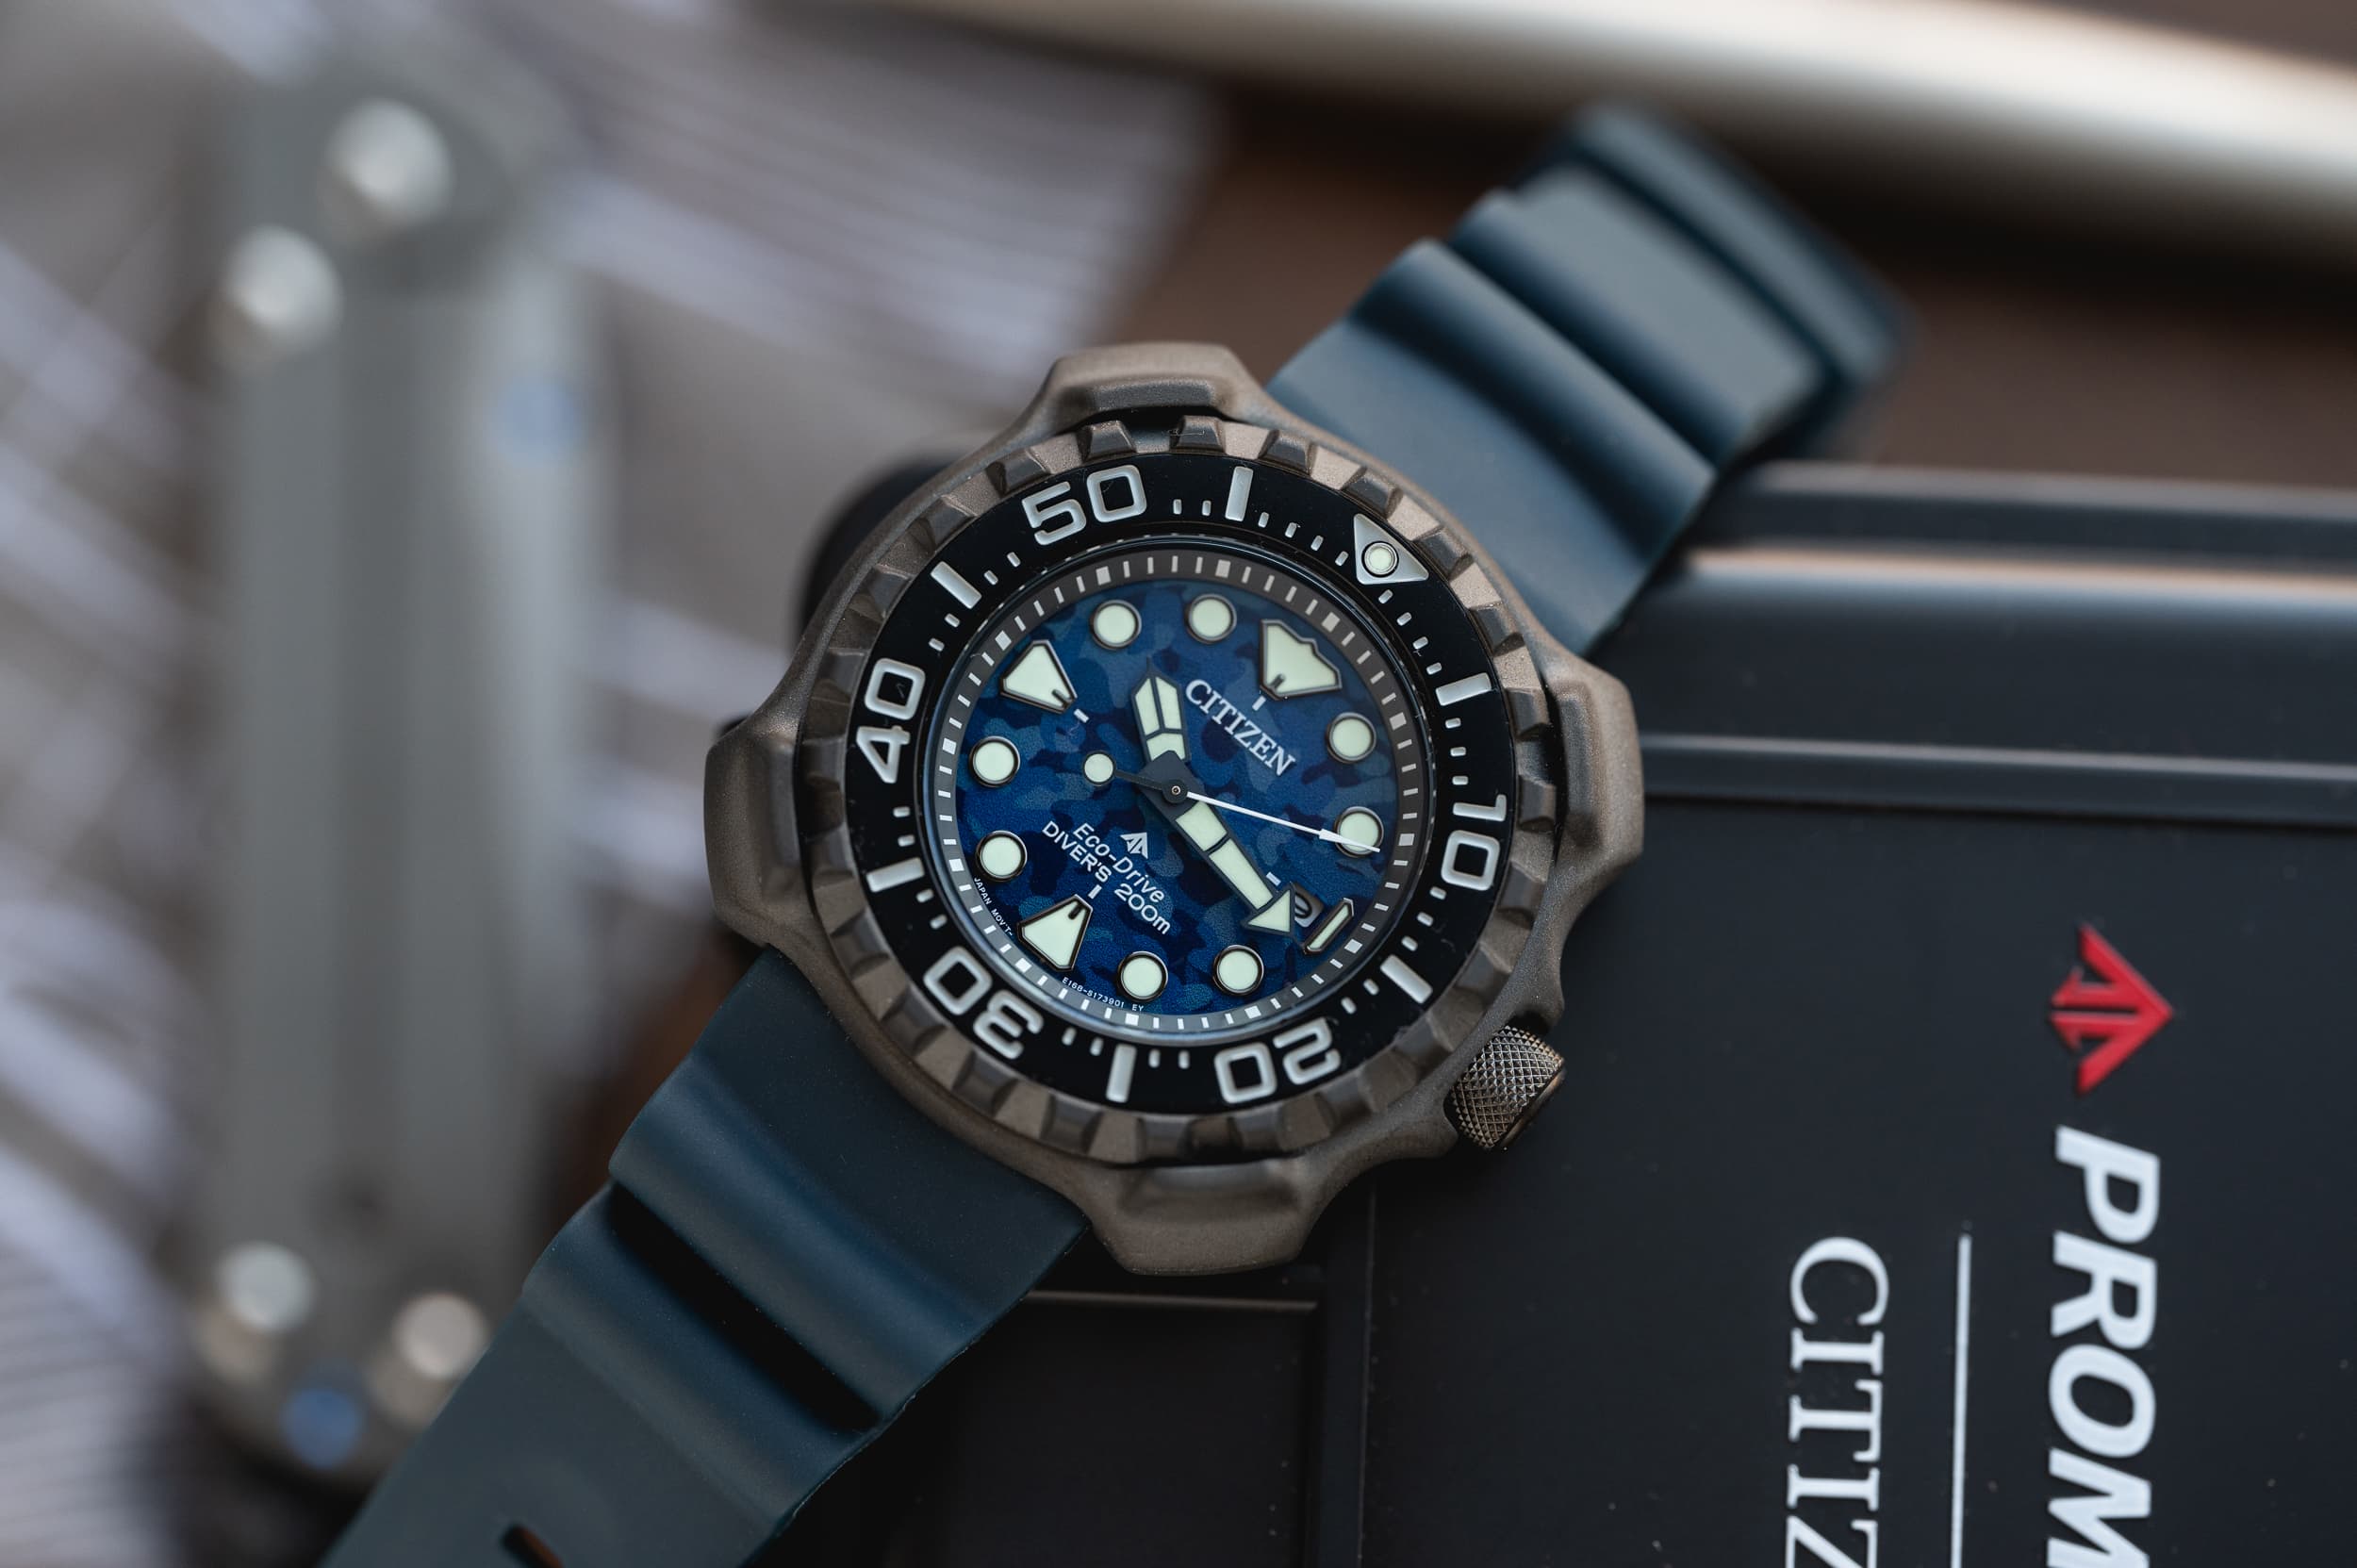 Review: The Assertive Yet Approachable BN0227-09L - Promaster & Diver Citizen Wound Worn